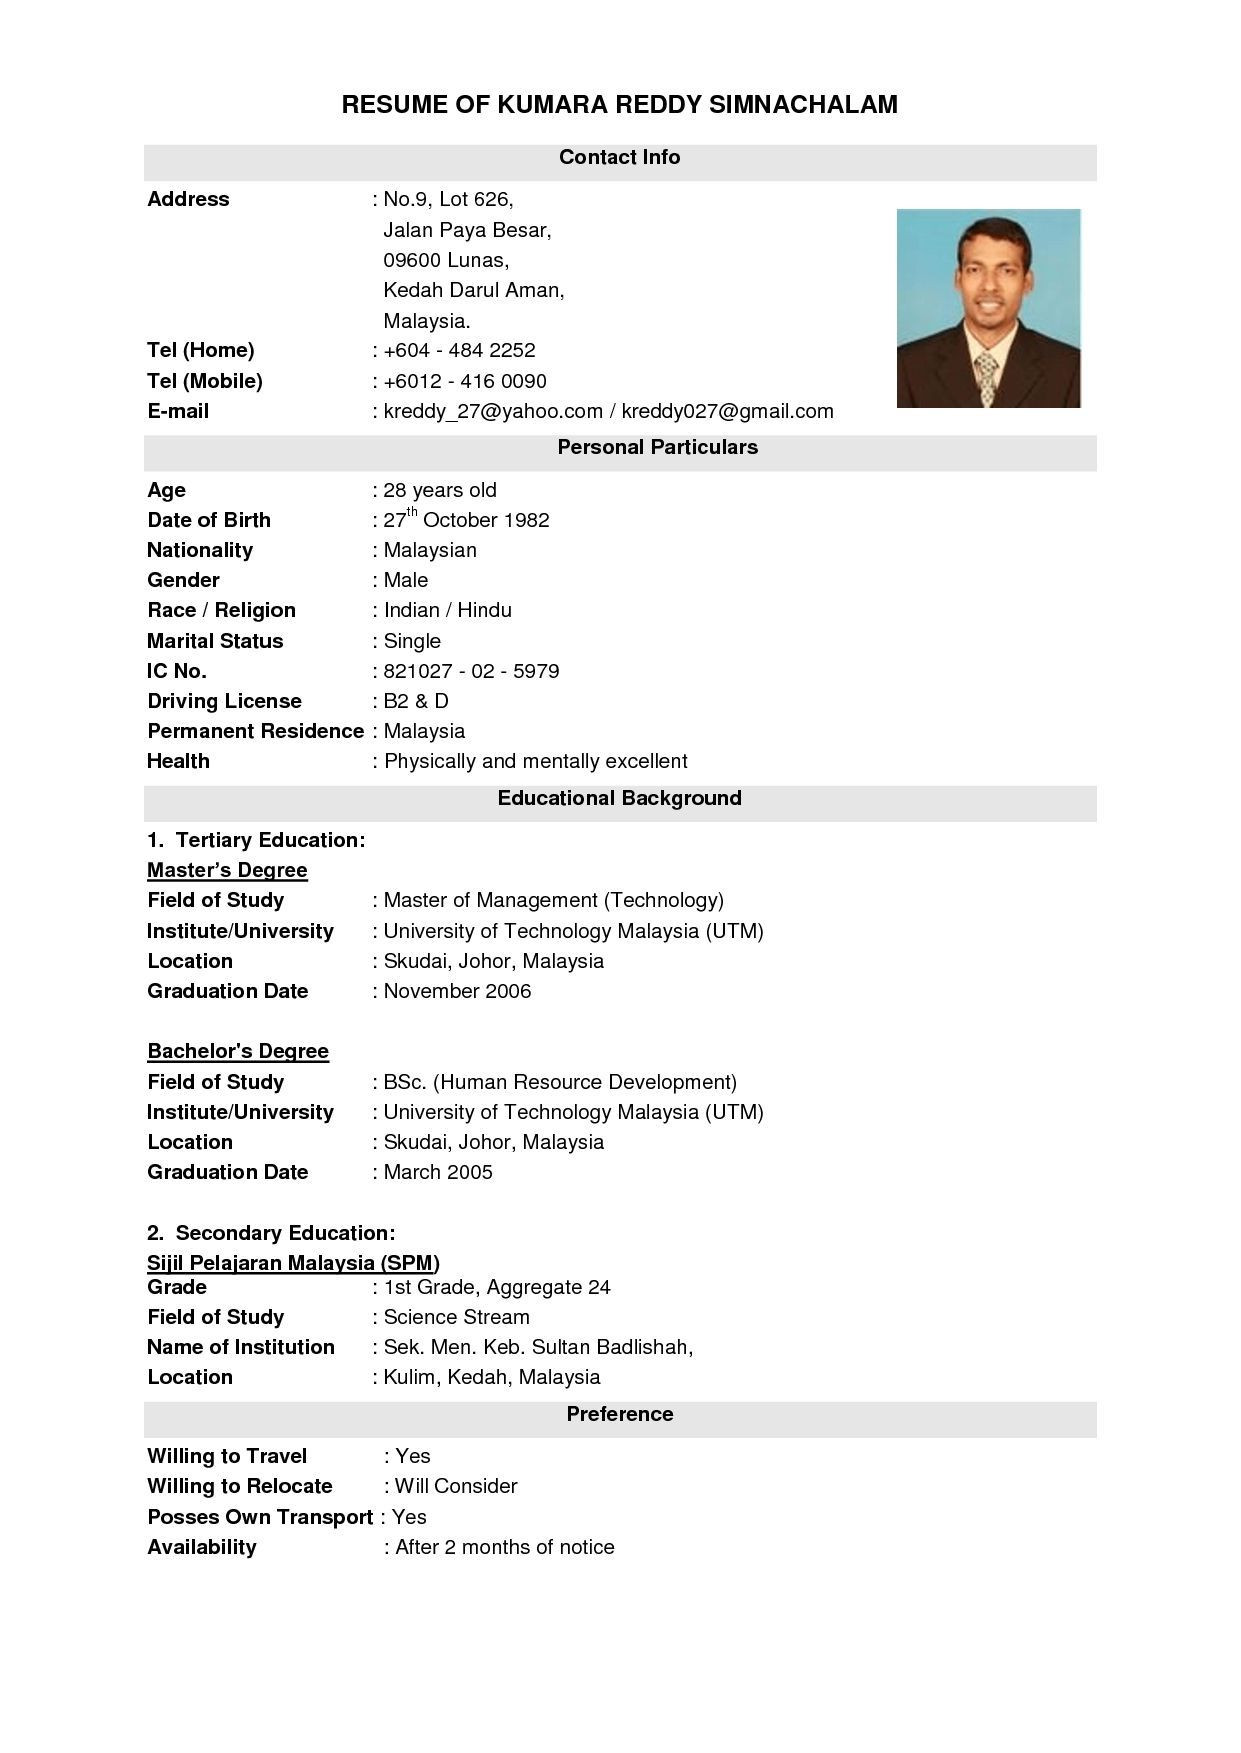 Sample Of A Good Resume In Malaysia Resume Templates Jobstreet #jobstreet #resume #resumetemplates …